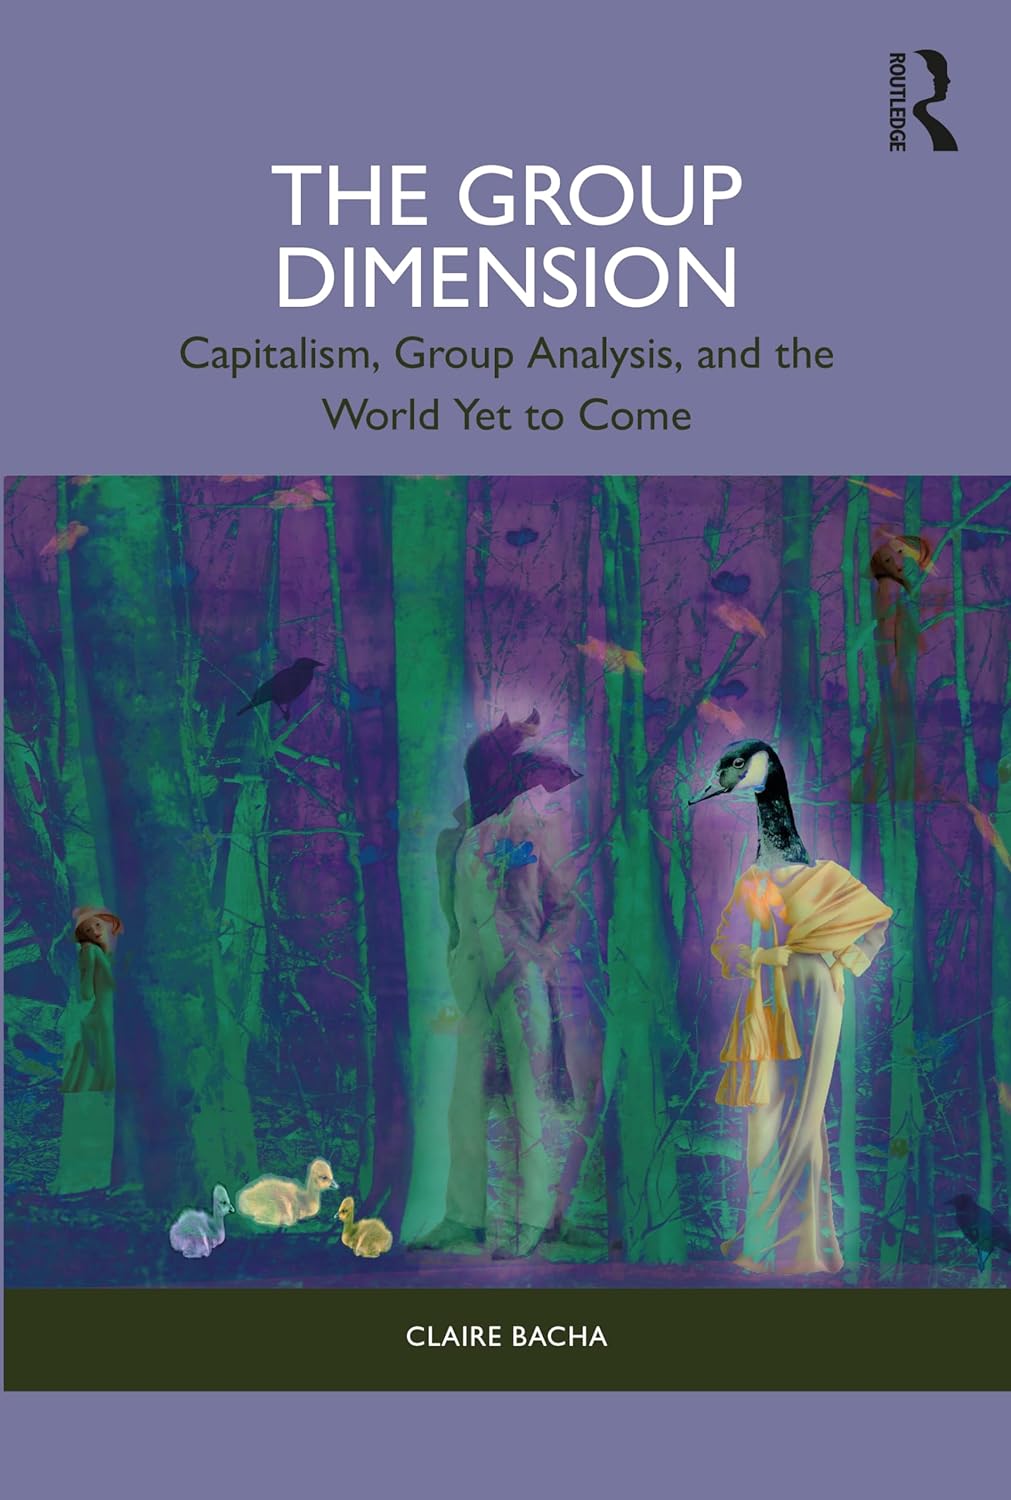 The Group Dimension: Capitalism, Group Analysis, and the World Yet to Come